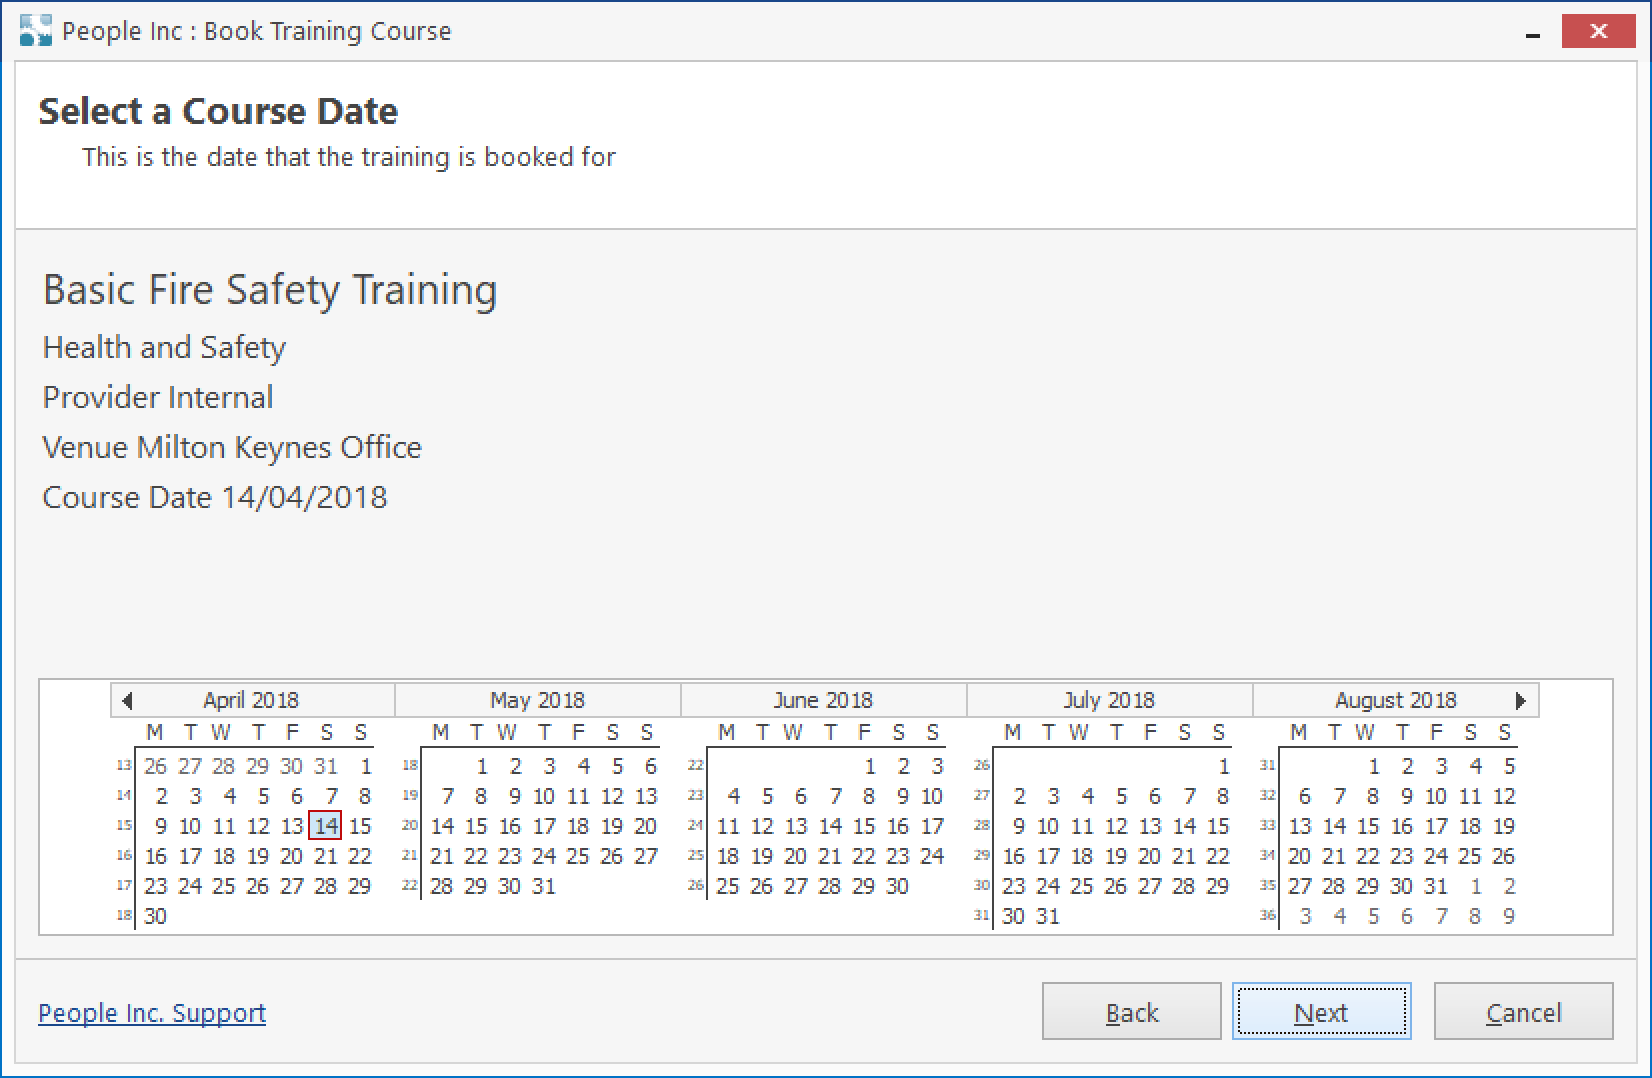 People Inc HR system tool showing course details with a calendar to select a booking date from